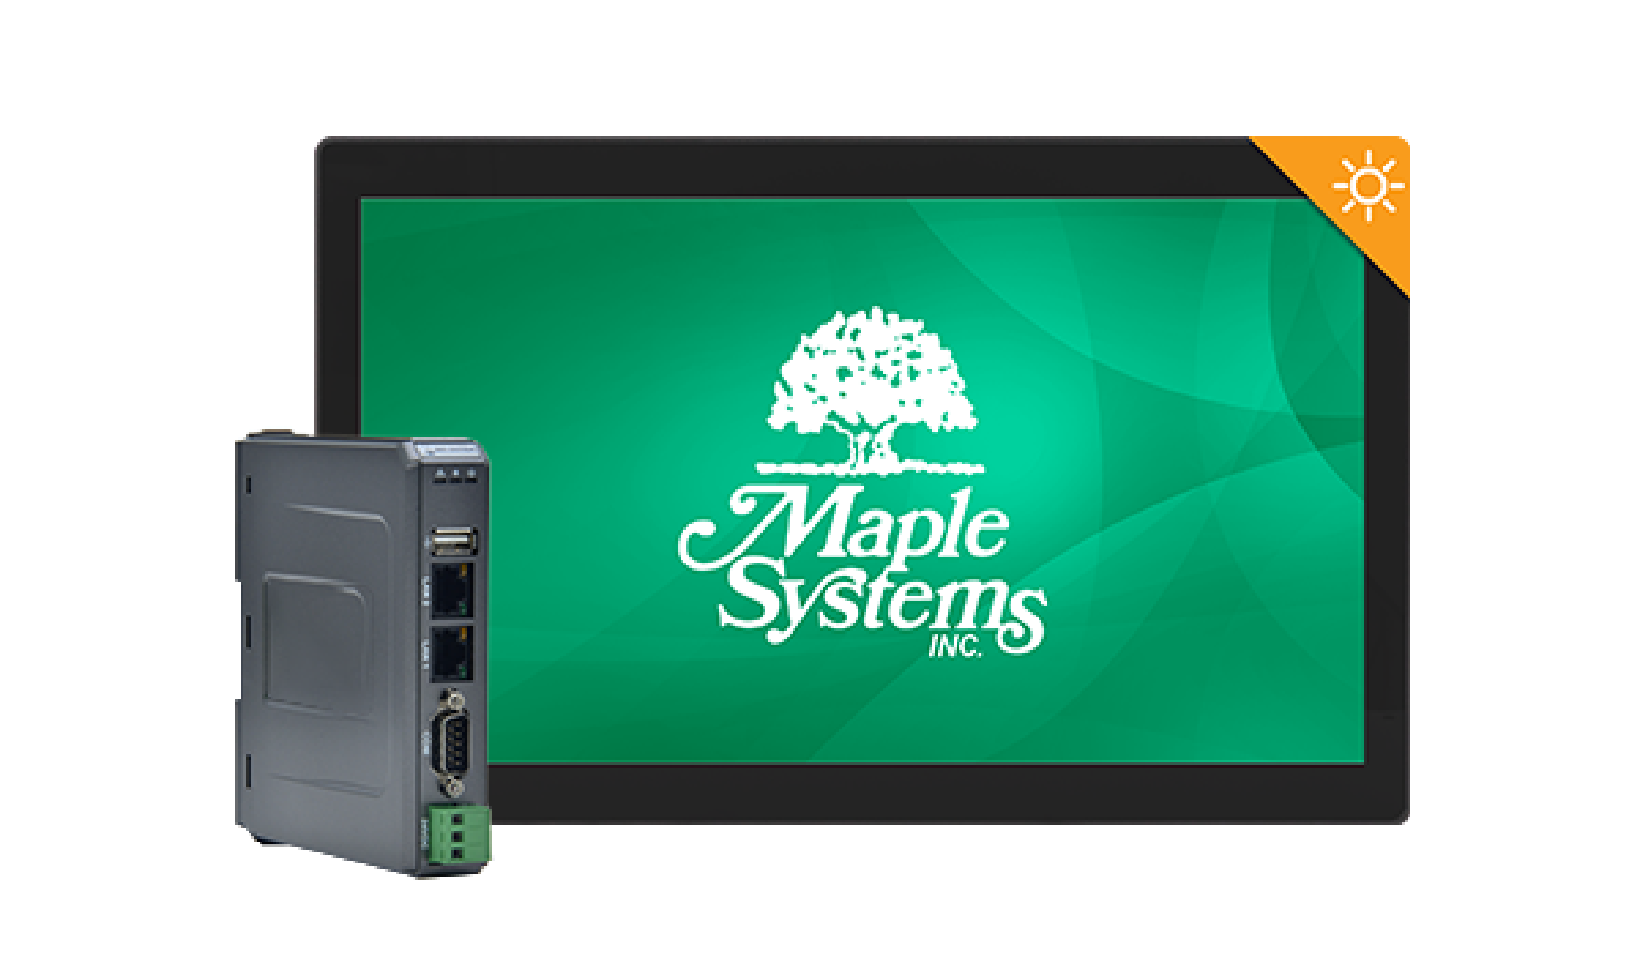  High Brightness HMI from Maple Systems